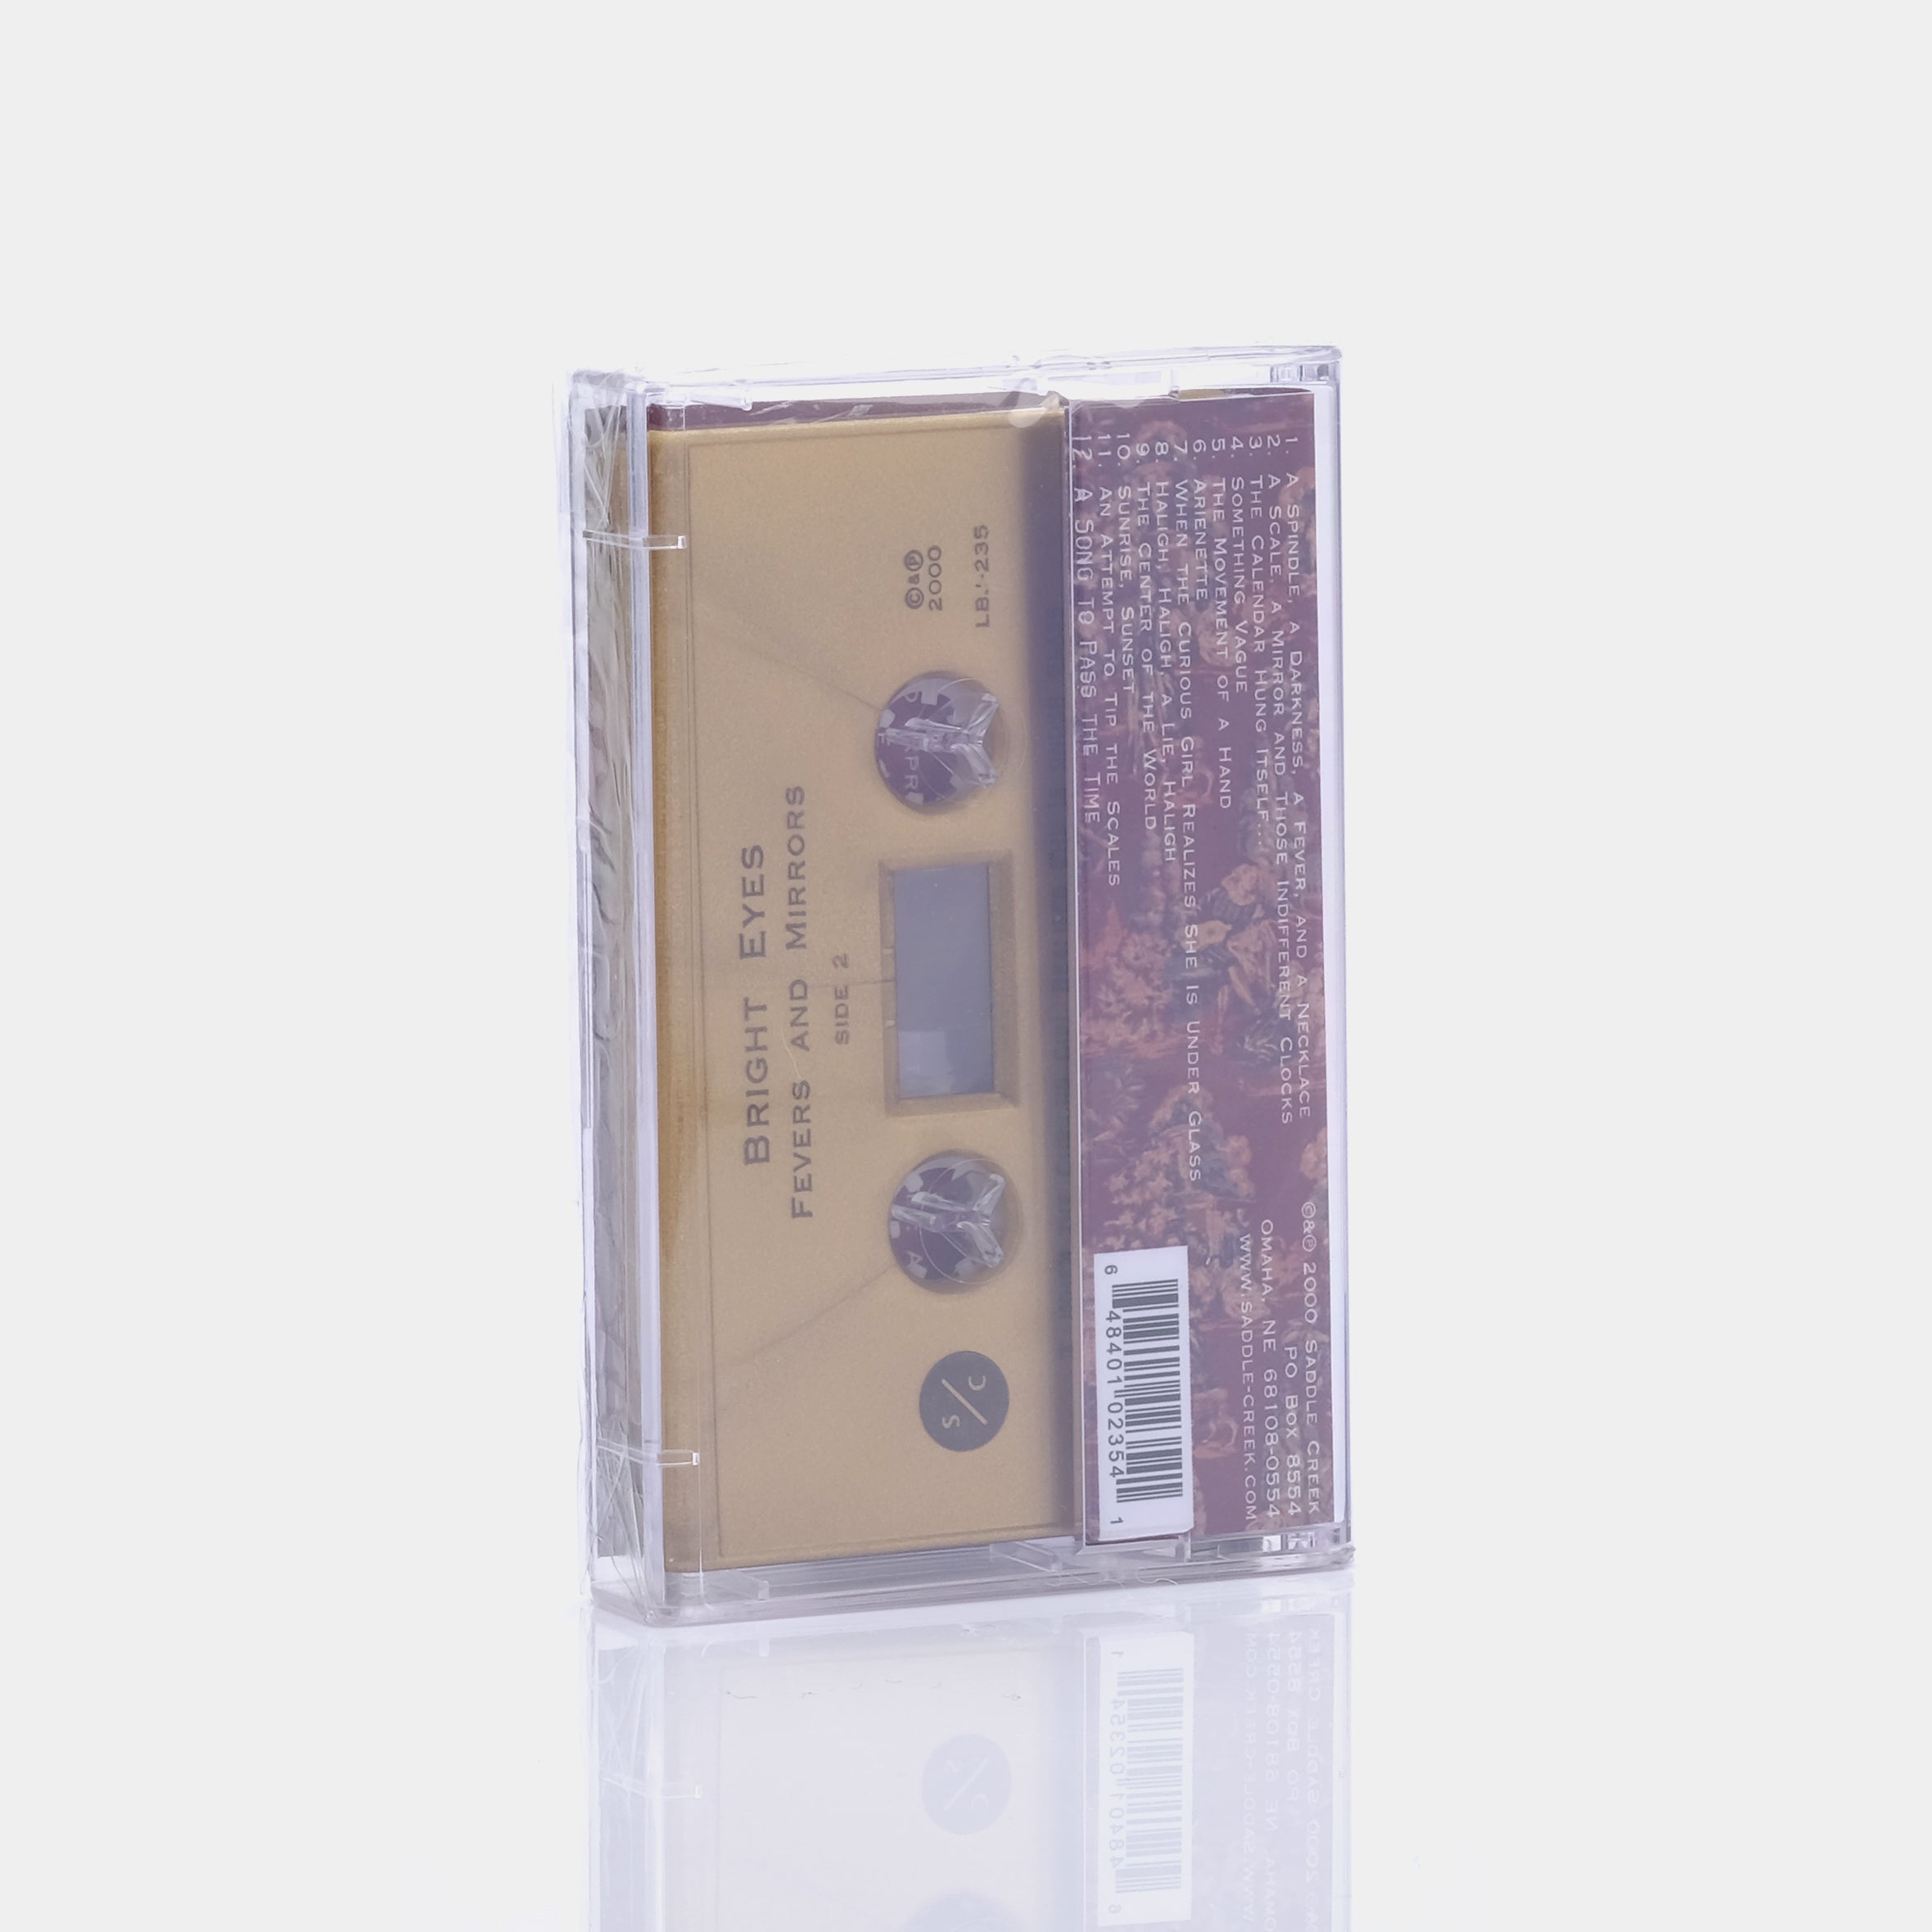 Bright Eyes - Fevers And Mirrors Cassette Tape